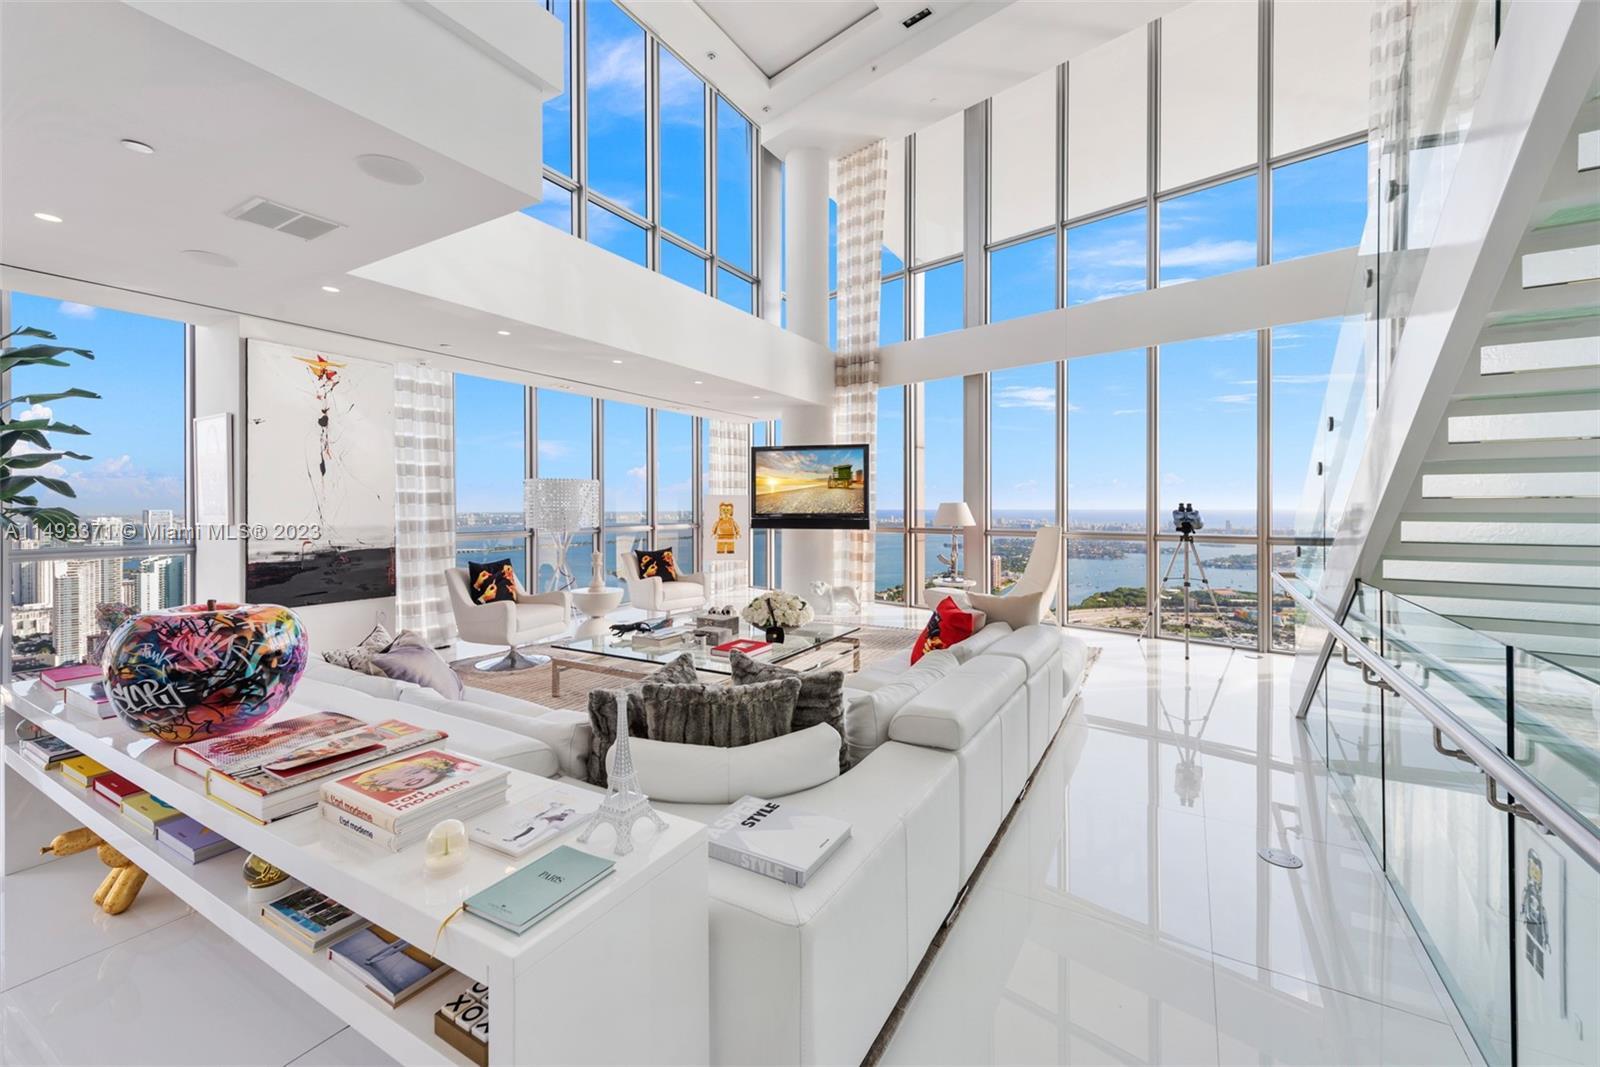 Perched on the 63rd floor of the Marquis Miami tower, this extraordinary 4-story penthouse offers br